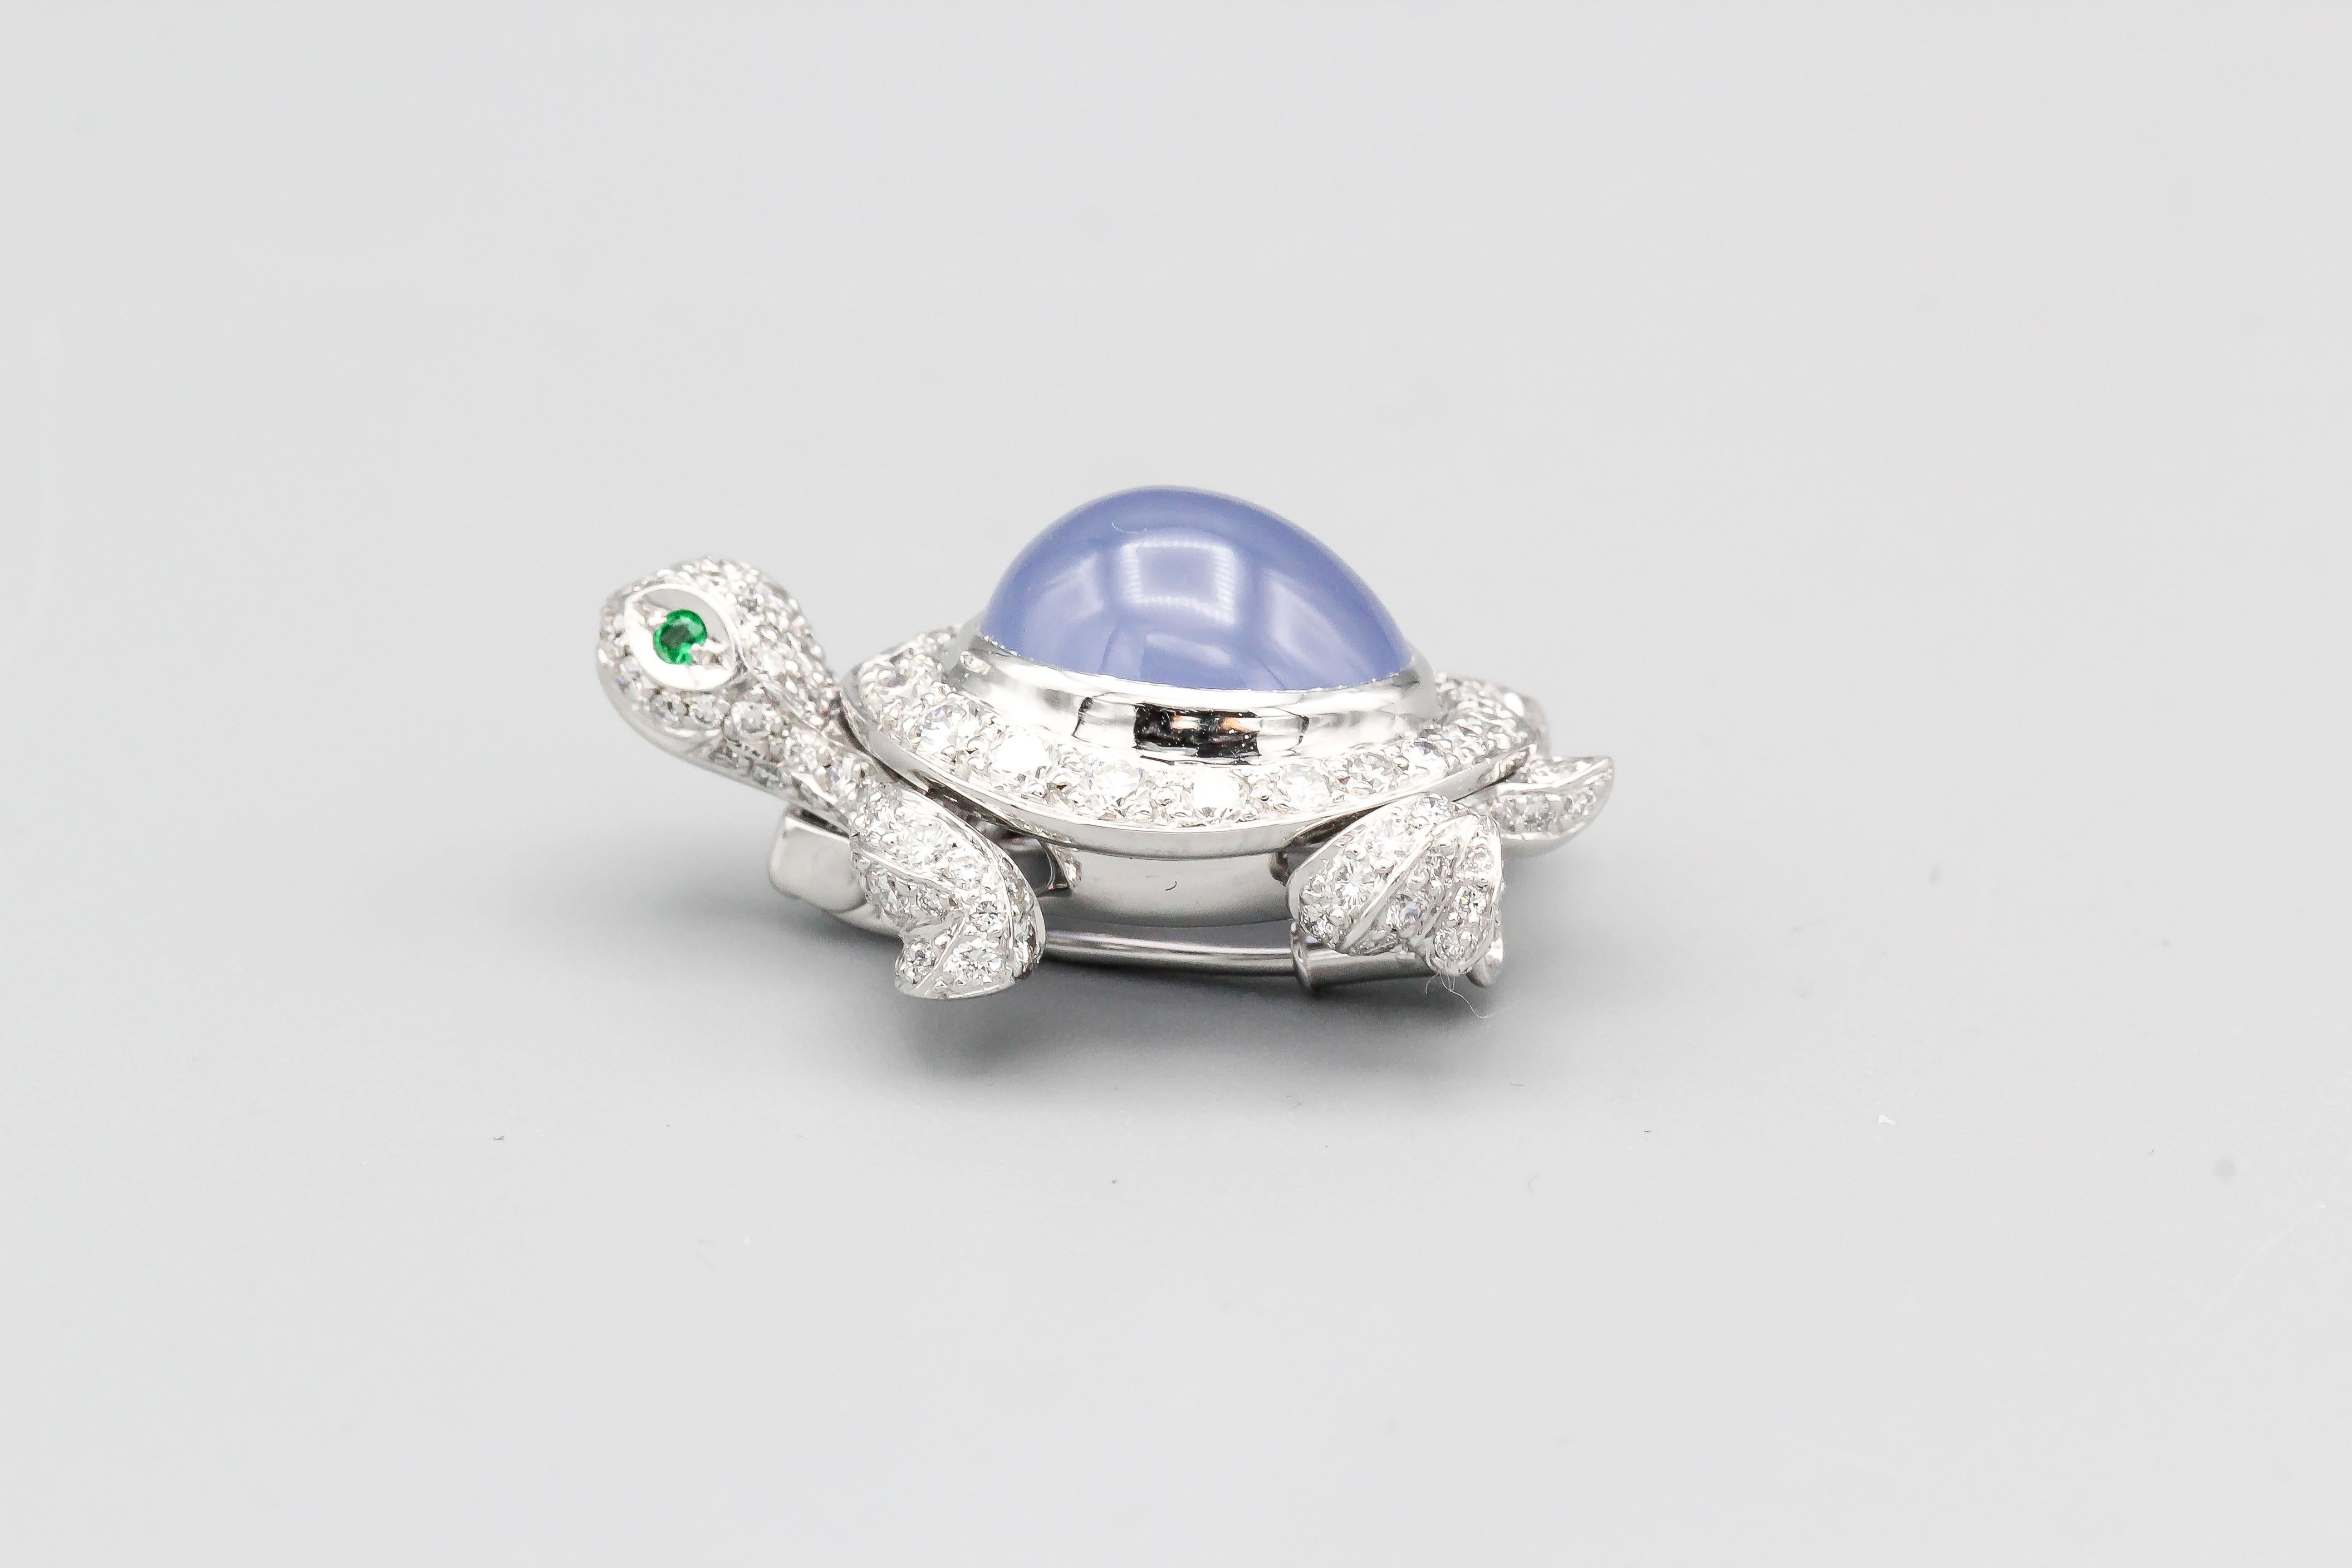 Exquisite Whimsy: Cartier Diamond Chalcedony and 18 Karat White Gold Turtle Brooch

This enchanting Cartier brooch embodies a timeless blend of luxury and playful elegance. Its whimsical turtle form is meticulously crafted from gleaming 18-karat